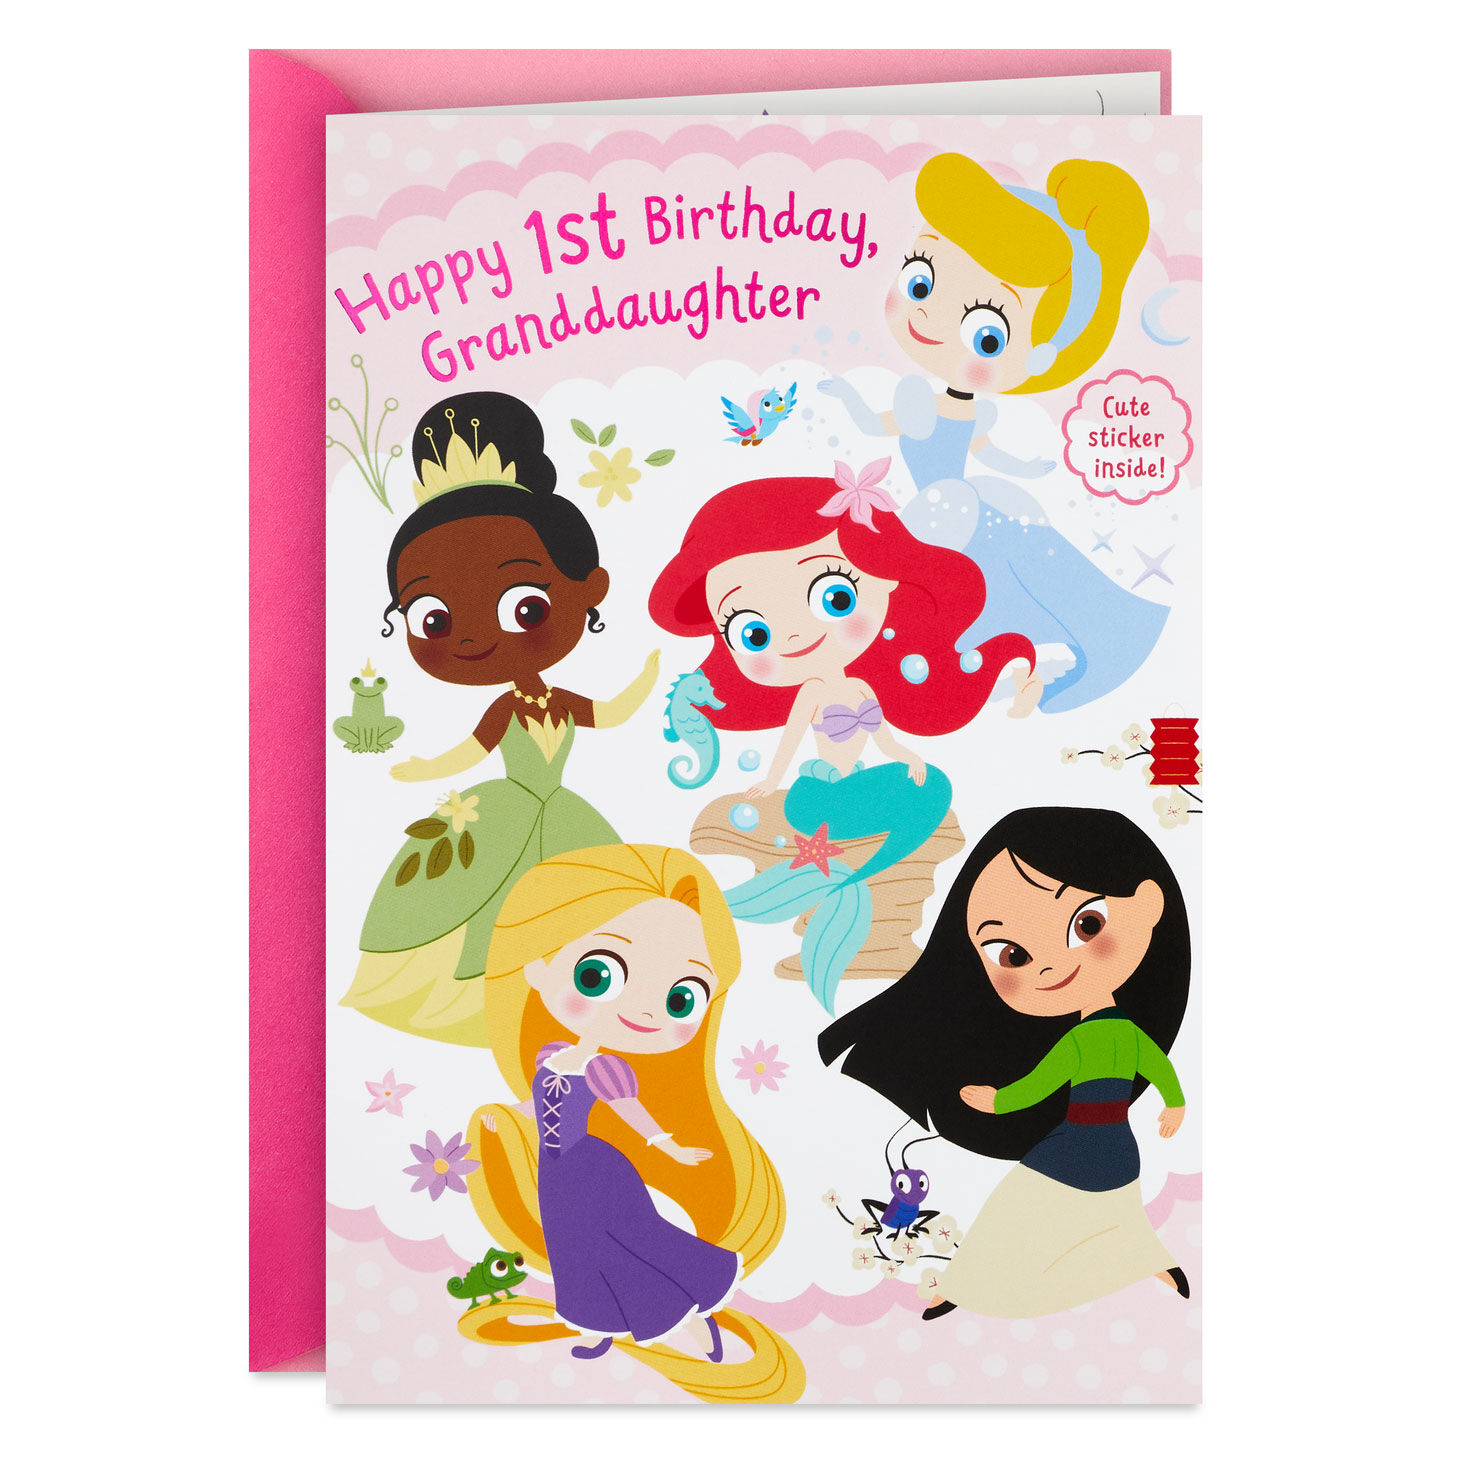 Disney Princess 1st Birthday Card for Granddaughter With Sticker for only USD 3.99 | Hallmark